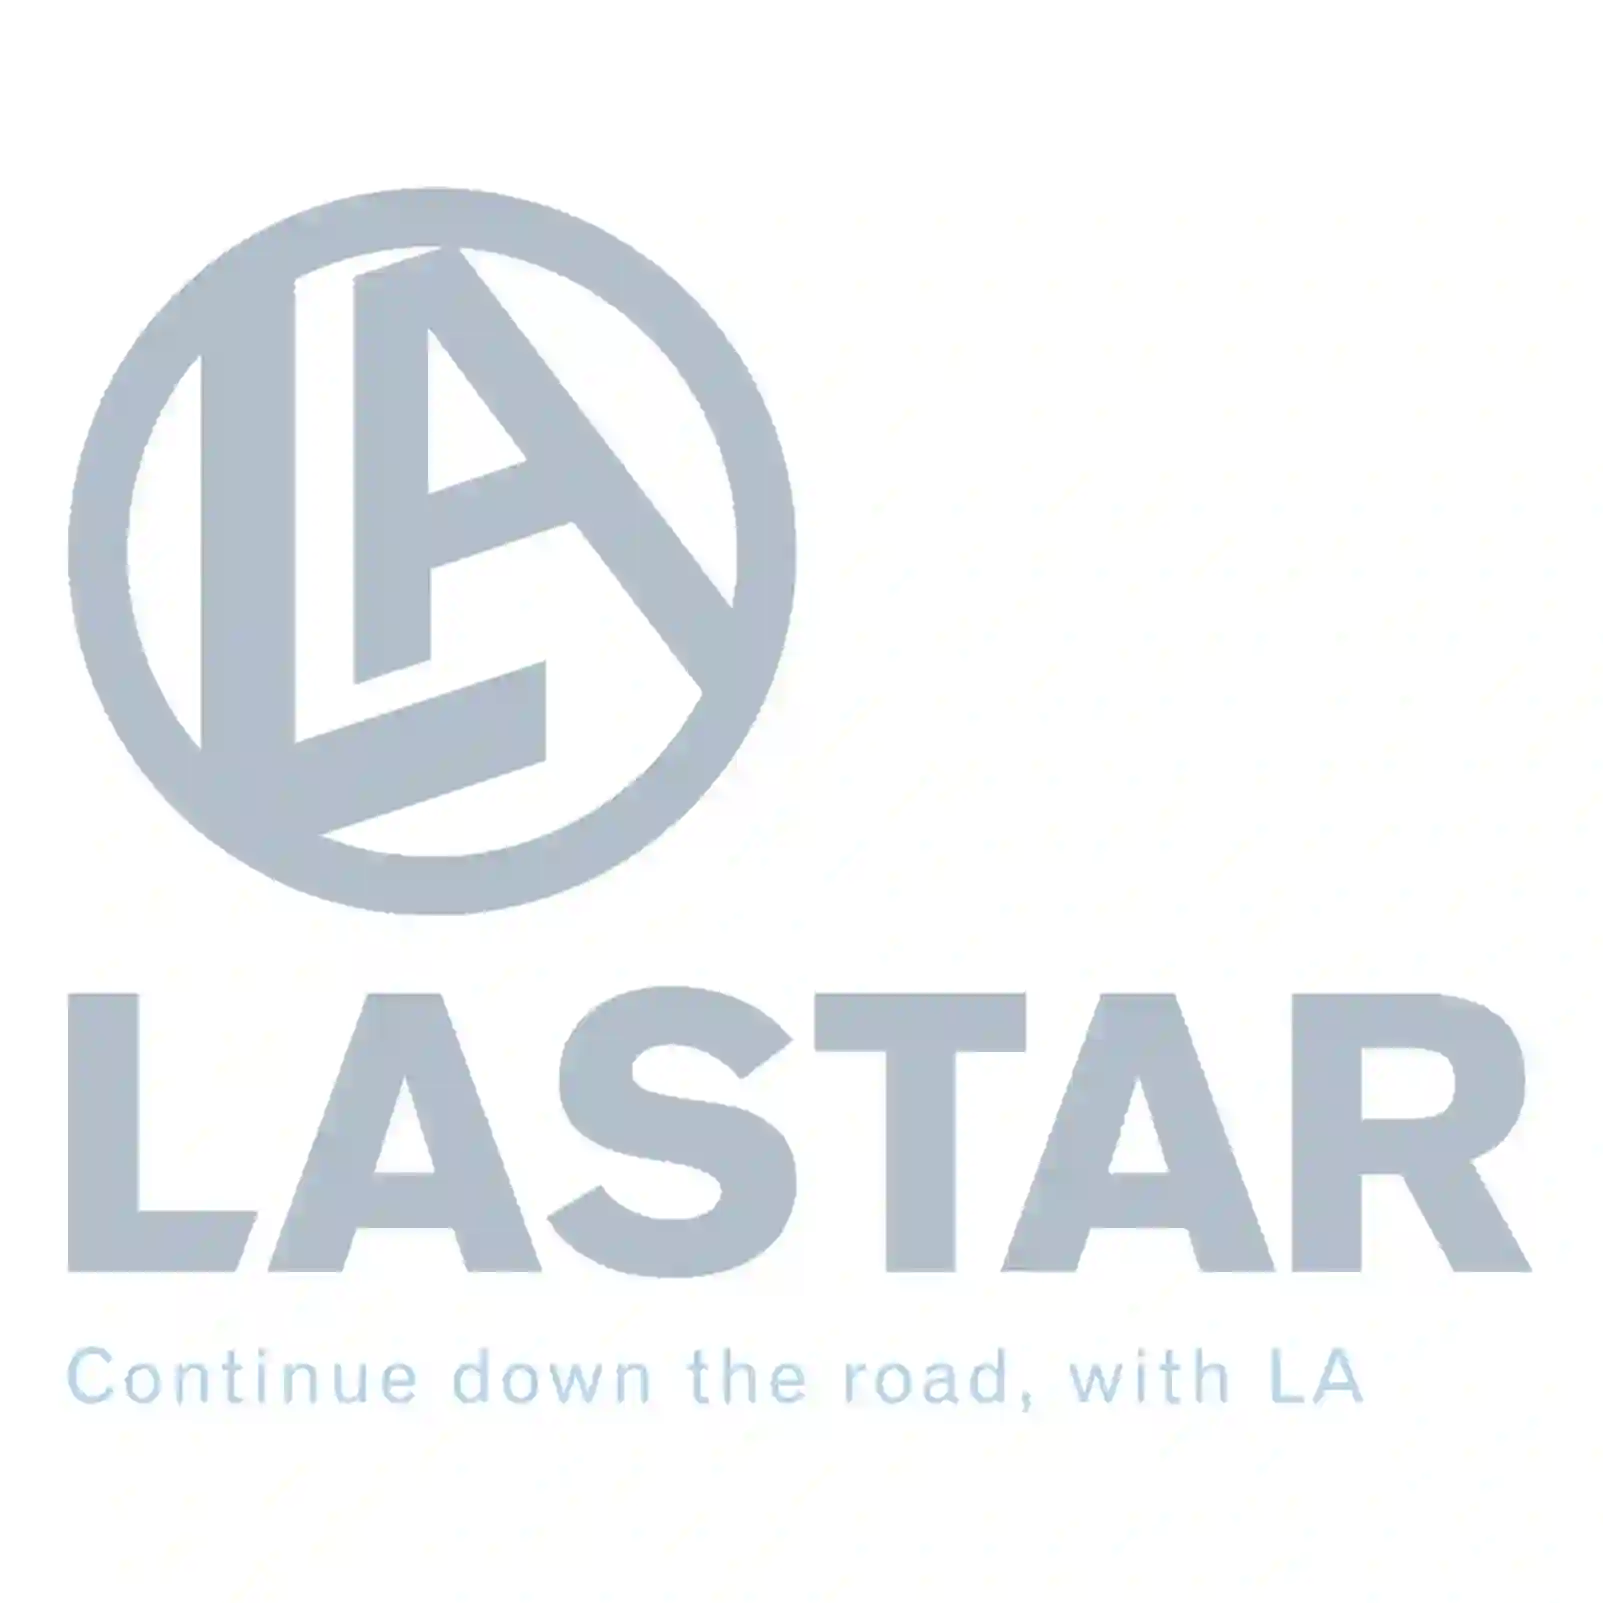  Gasket, intake manifold || Lastar Spare Part | Truck Spare Parts, Auotomotive Spare Parts